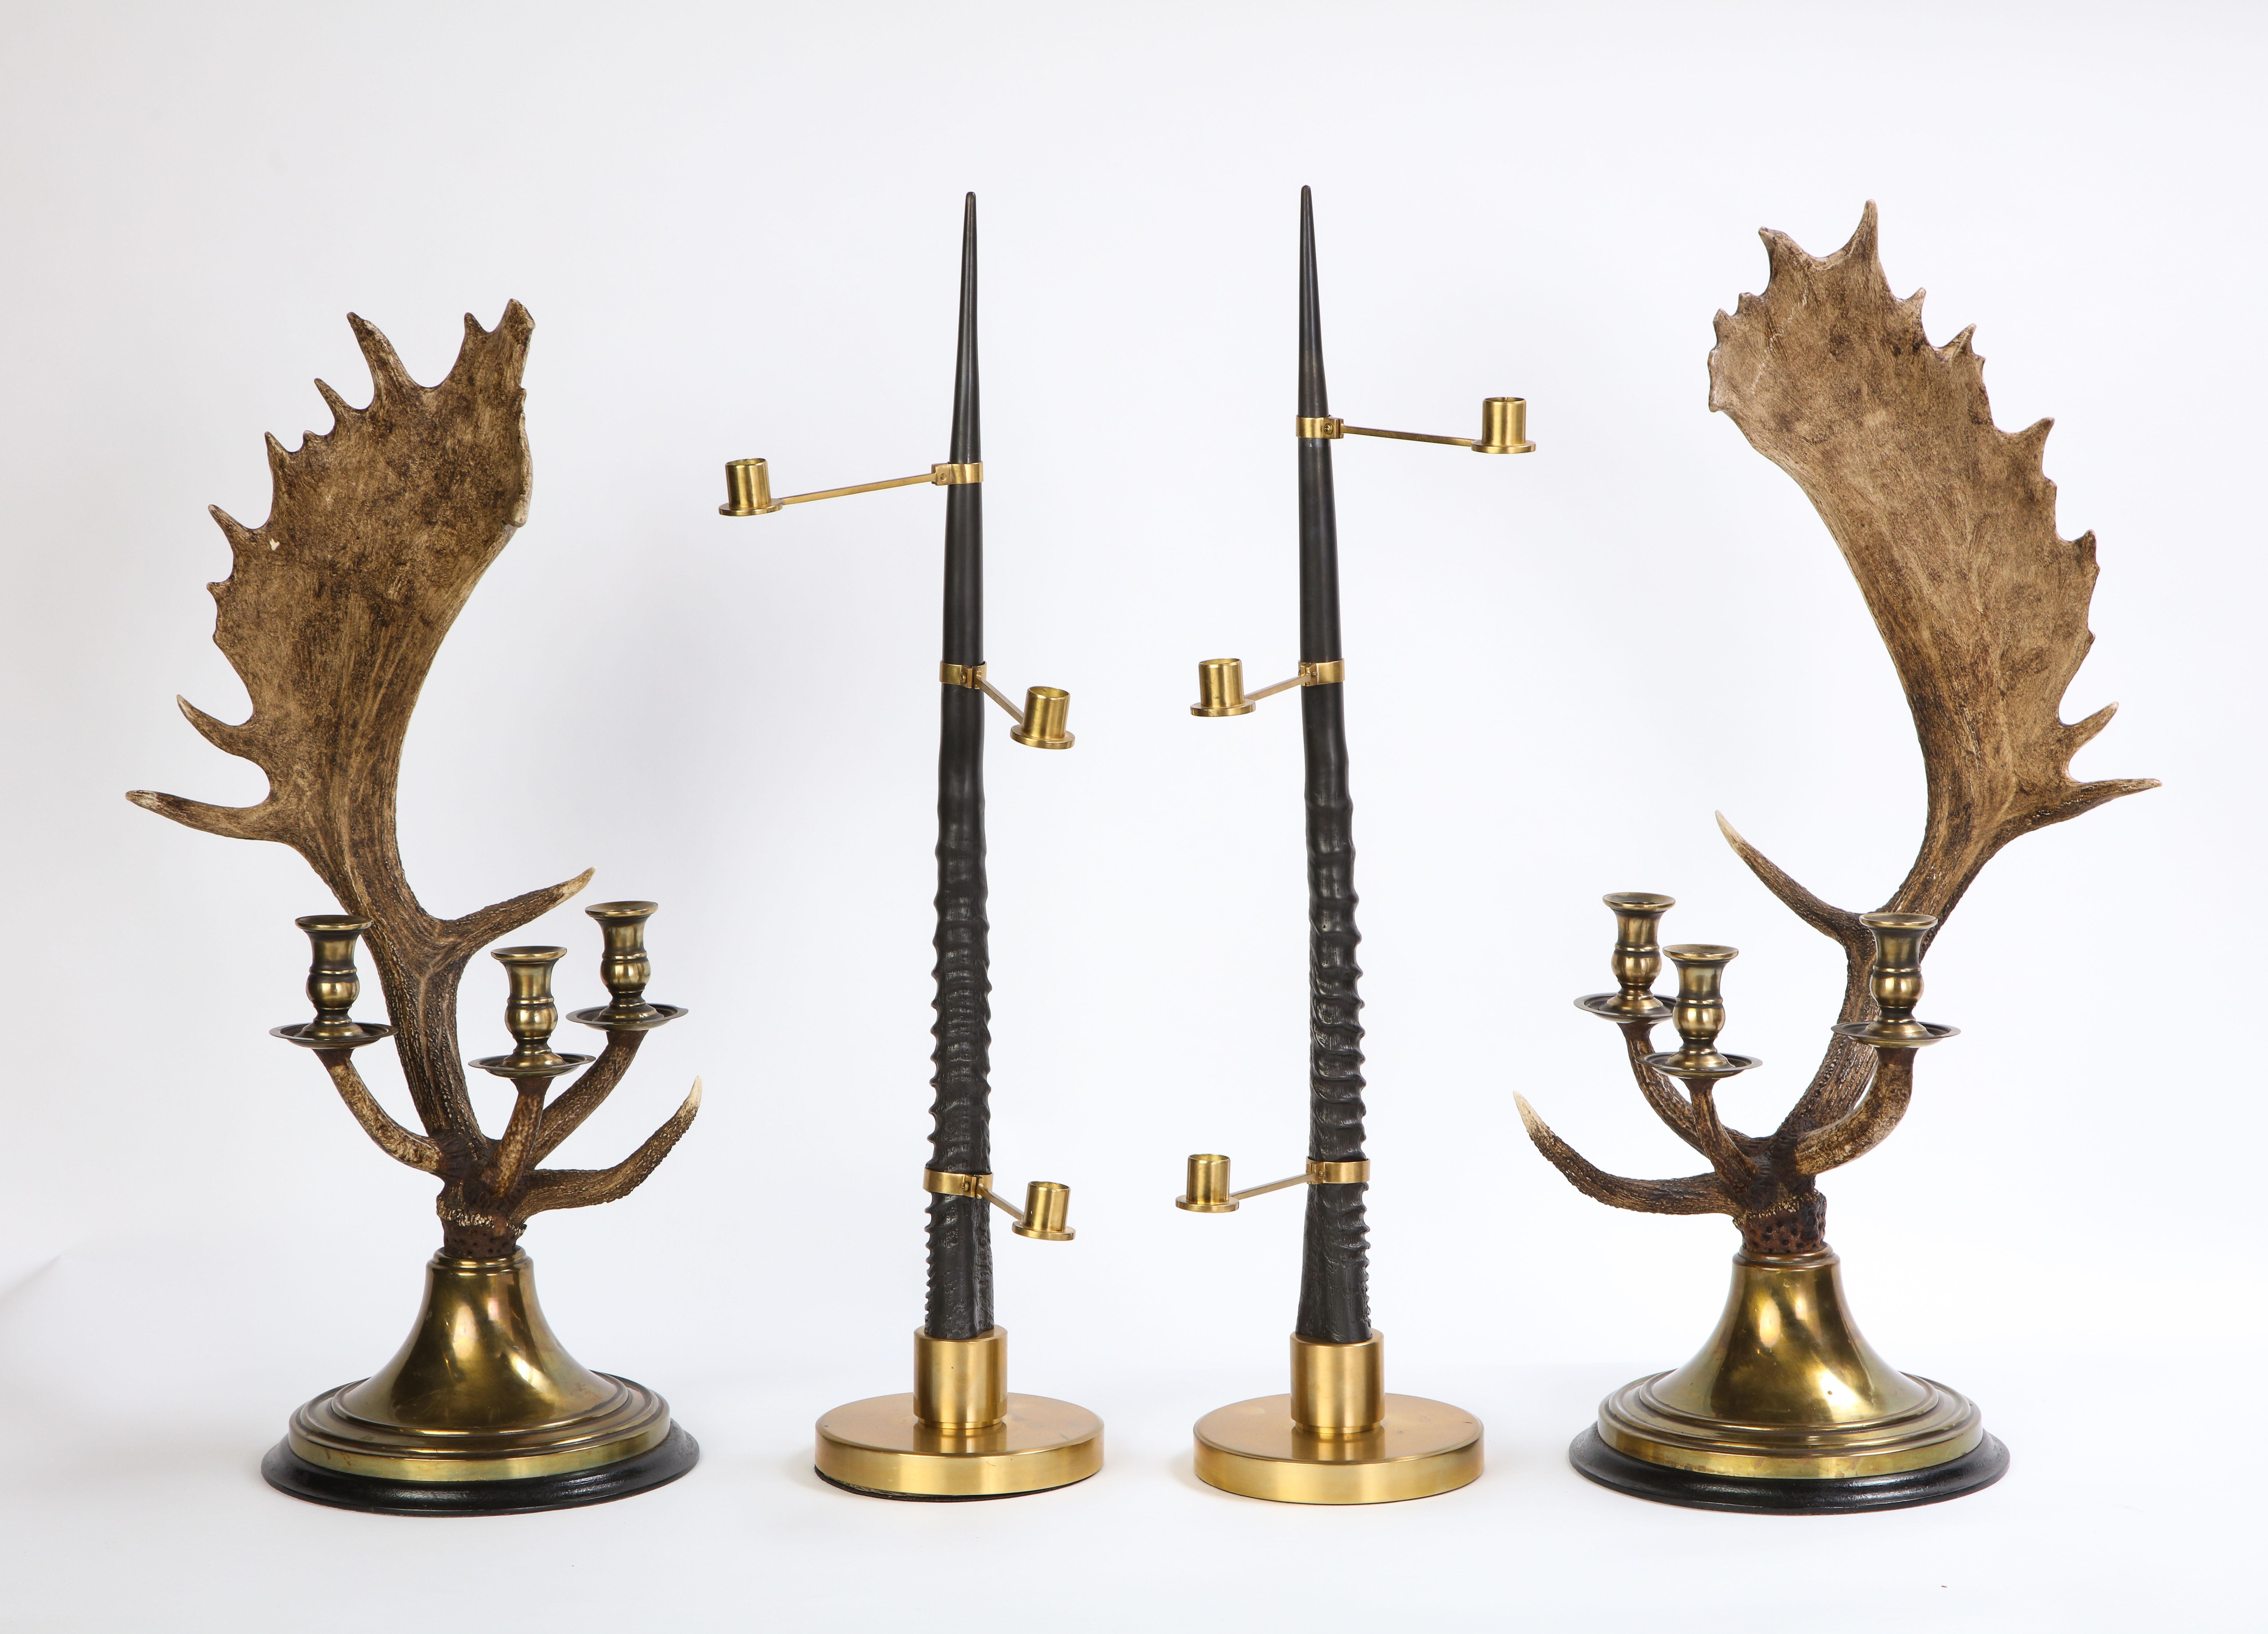 This set of five candelabra includes a striking pair of modern brass-mounted moose antler-form three-light candelabra, as well as an antler-form table mount and a pair of modern gilt-metal mounted faux antler three-light candelabra. This set is